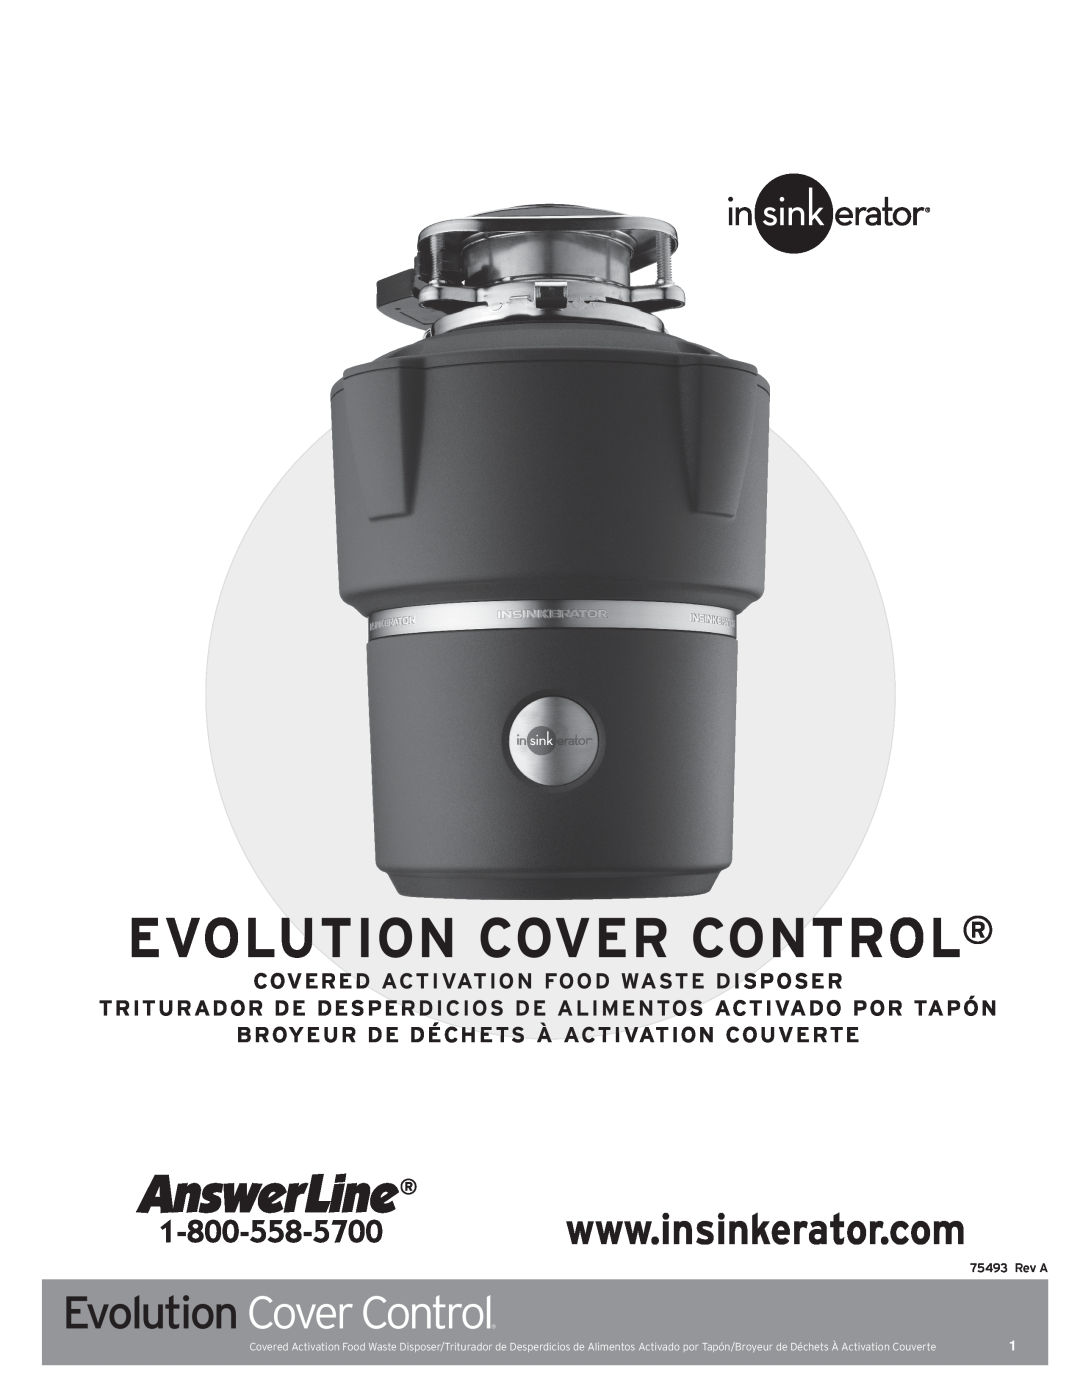 InSinkErator Evolution Series manual Evolution Cover Control, Covered Activation Food Waste Disposer 